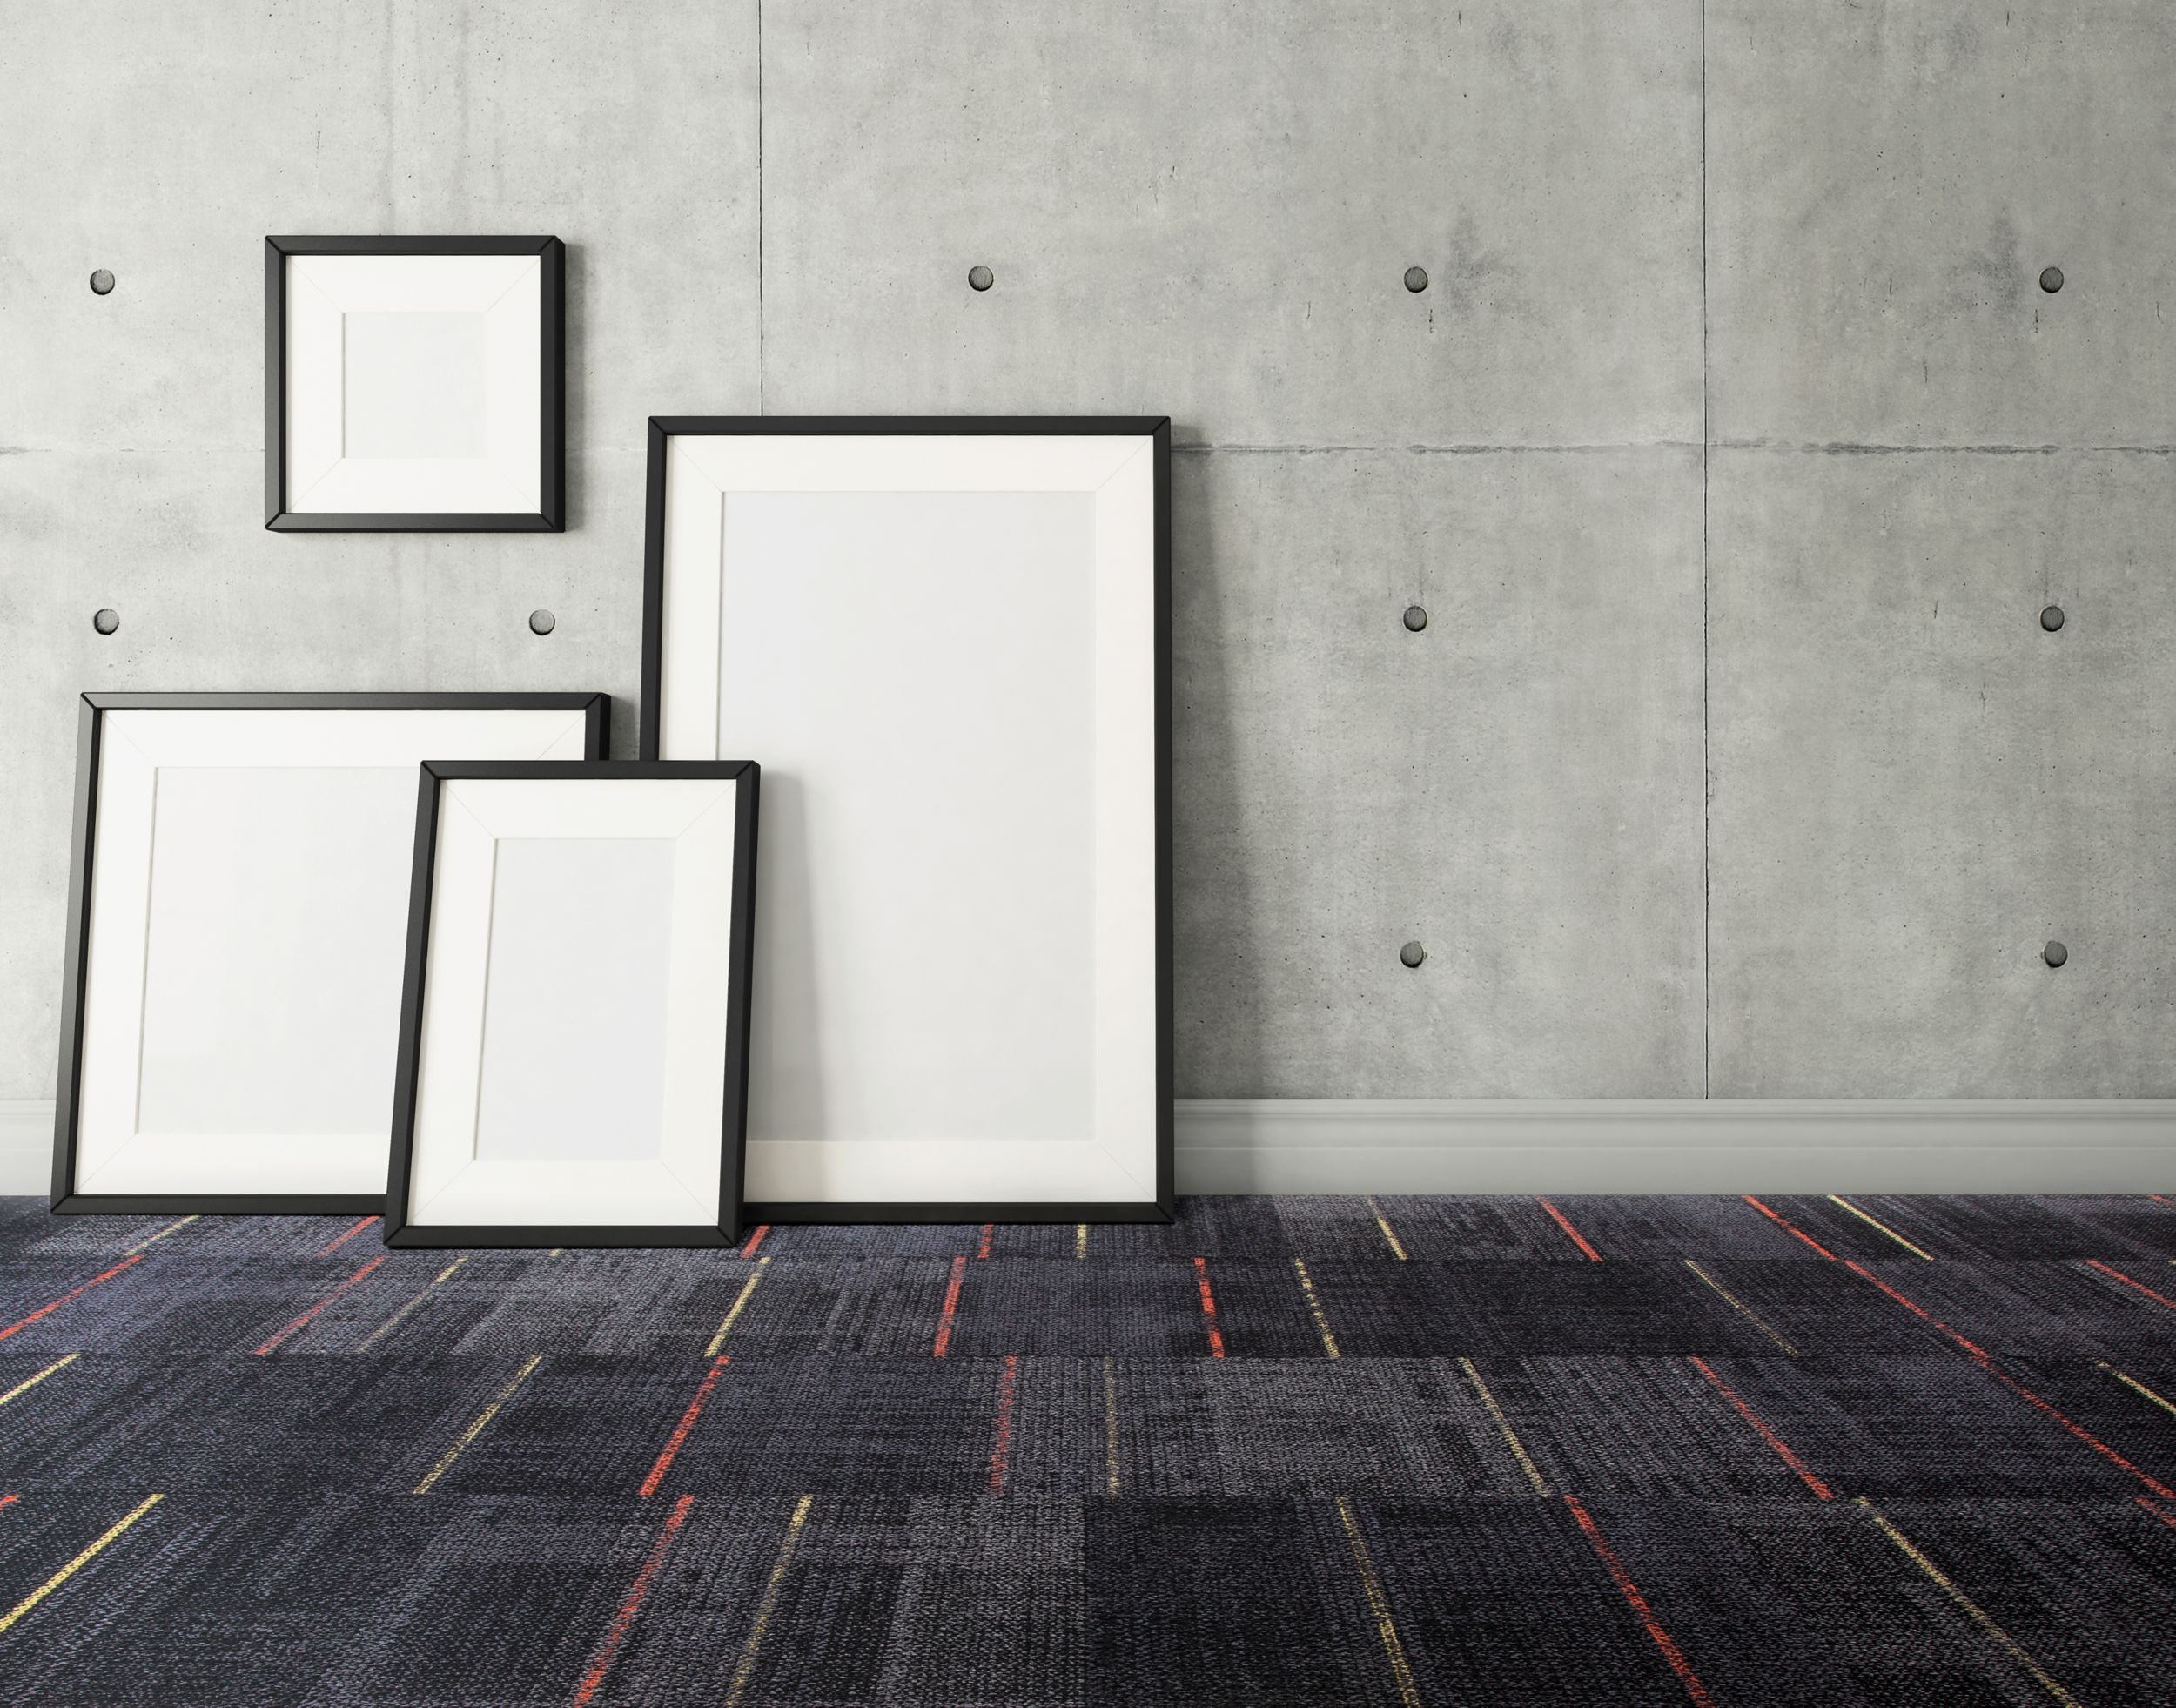 Interface AE312 carpet tile in open room with blank canvases against wall imagen número 3